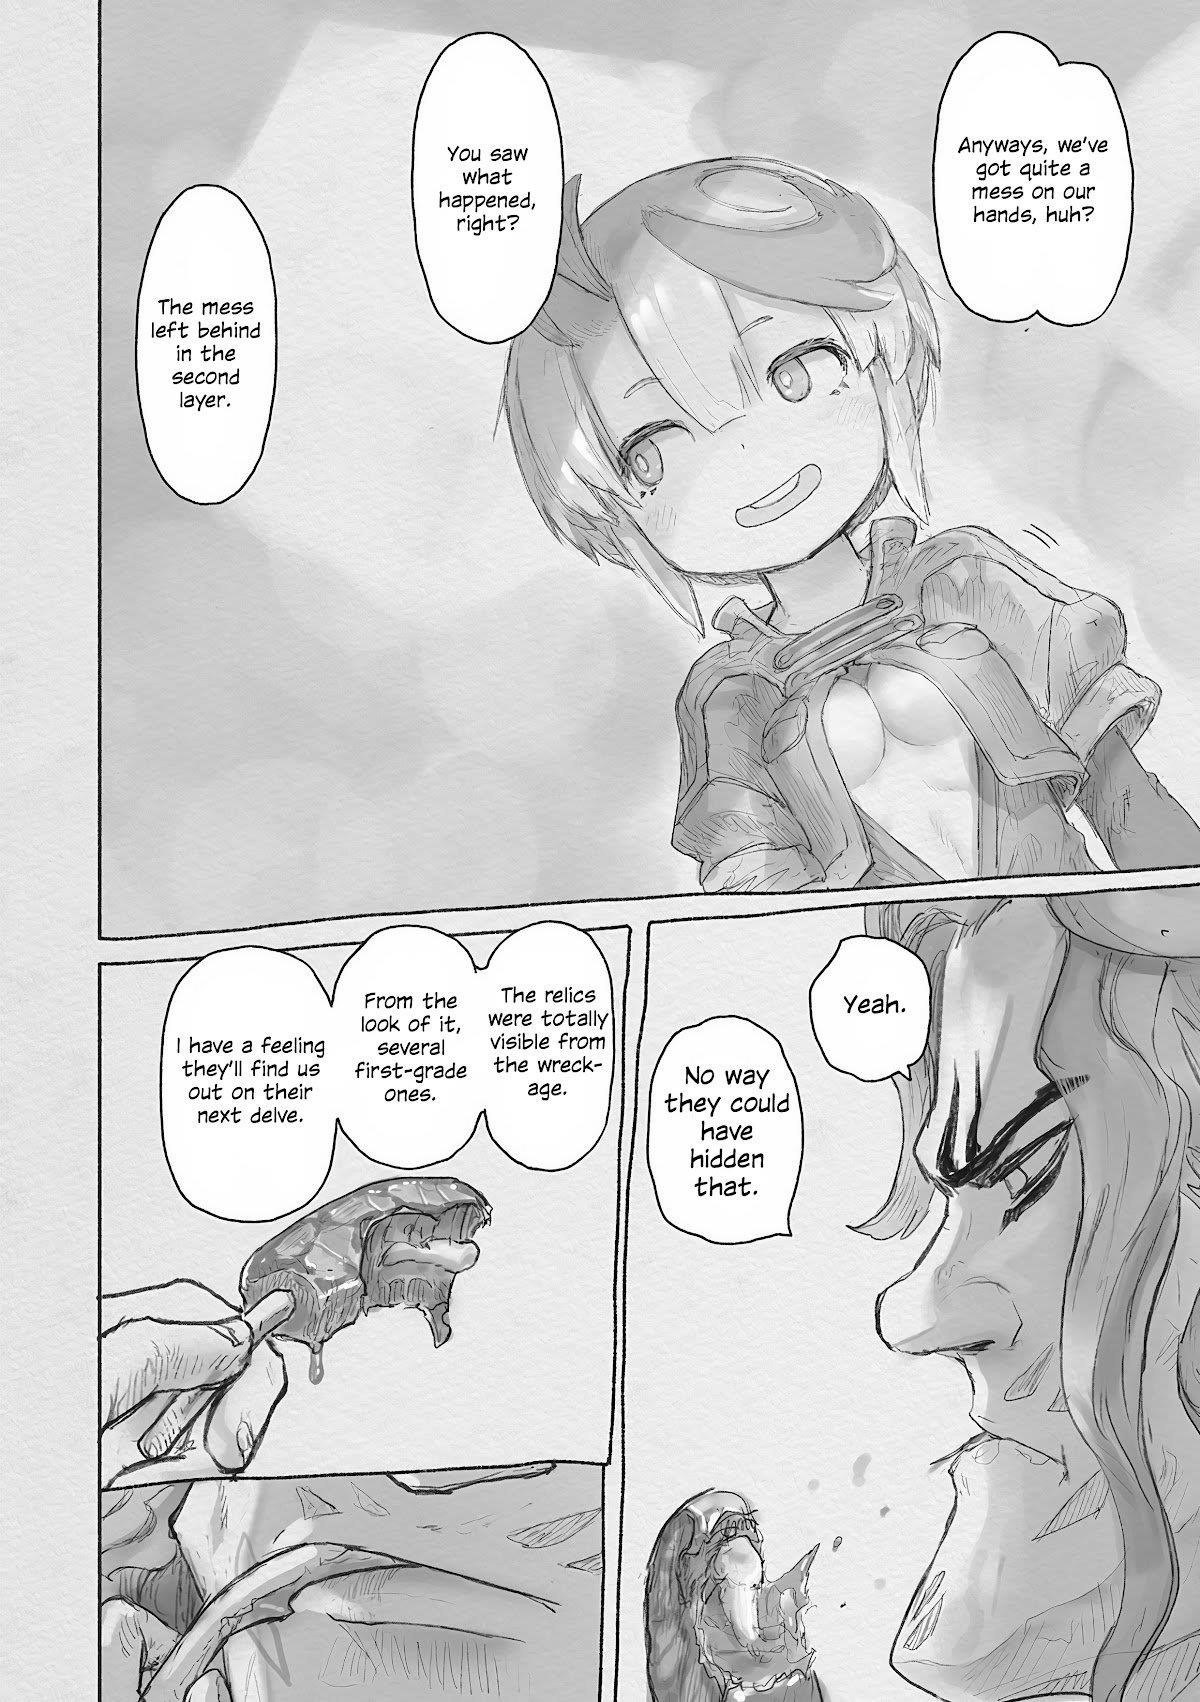 Made In Abyss Chapter 63 Made in Abyss, Chapter 63 - Made in Abyss Manga Online